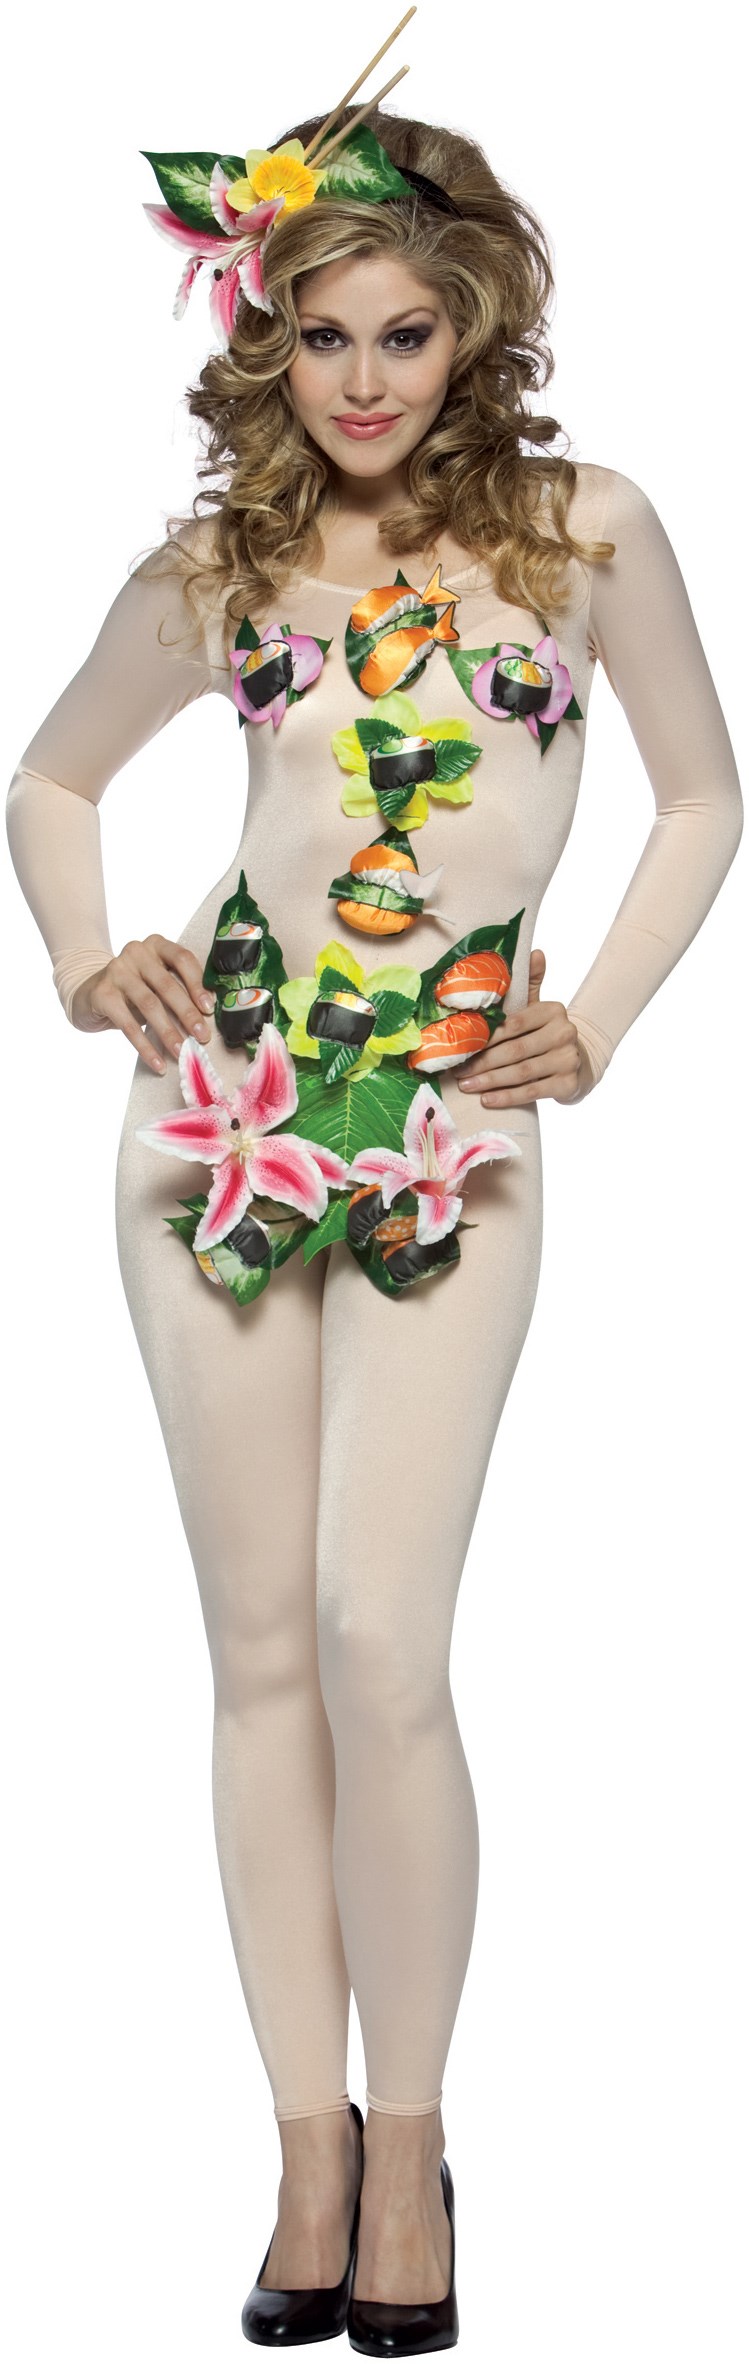 The Sushis On Me Adult Costume